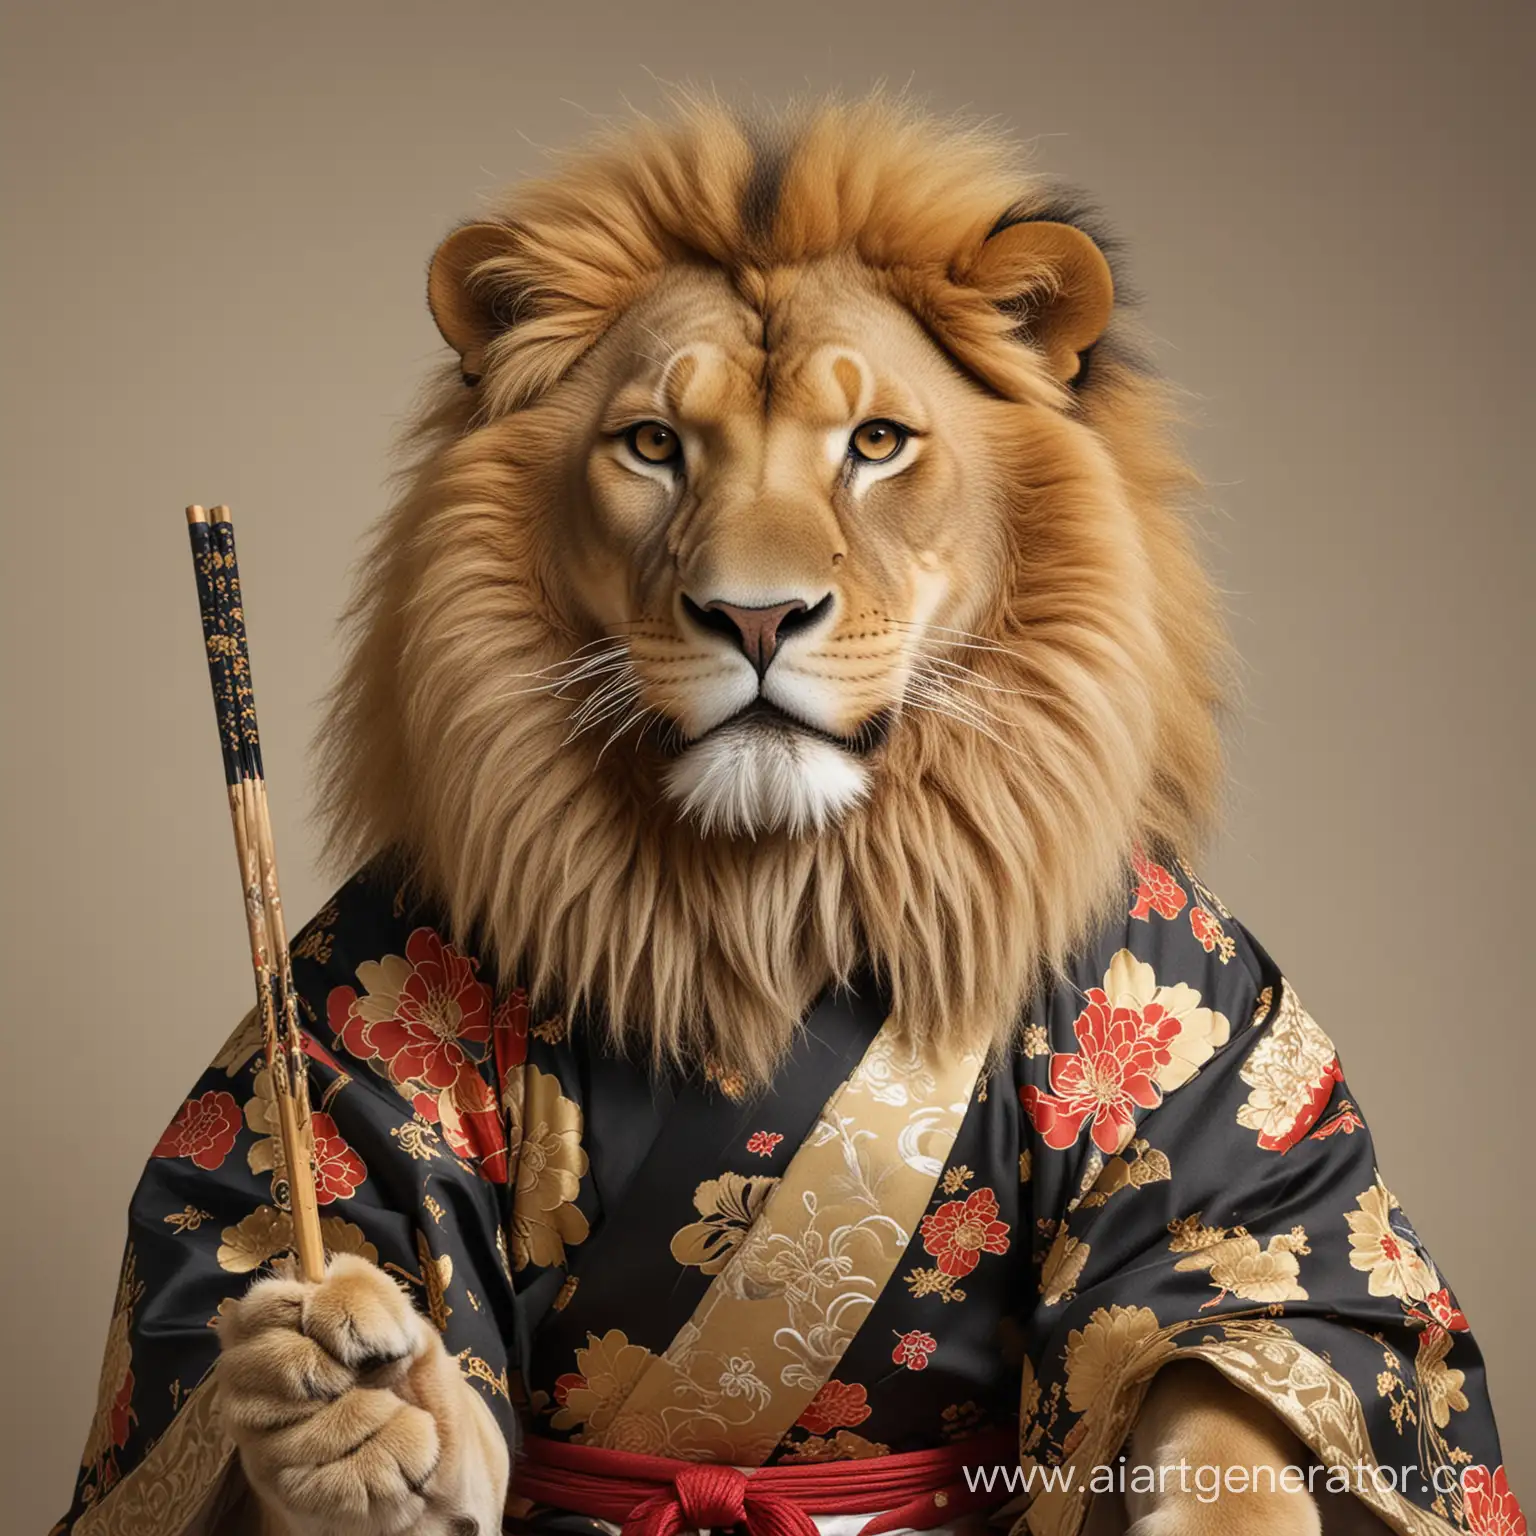 Regal-Lion-in-Traditional-Japanese-Attire-Holding-Chopsticks